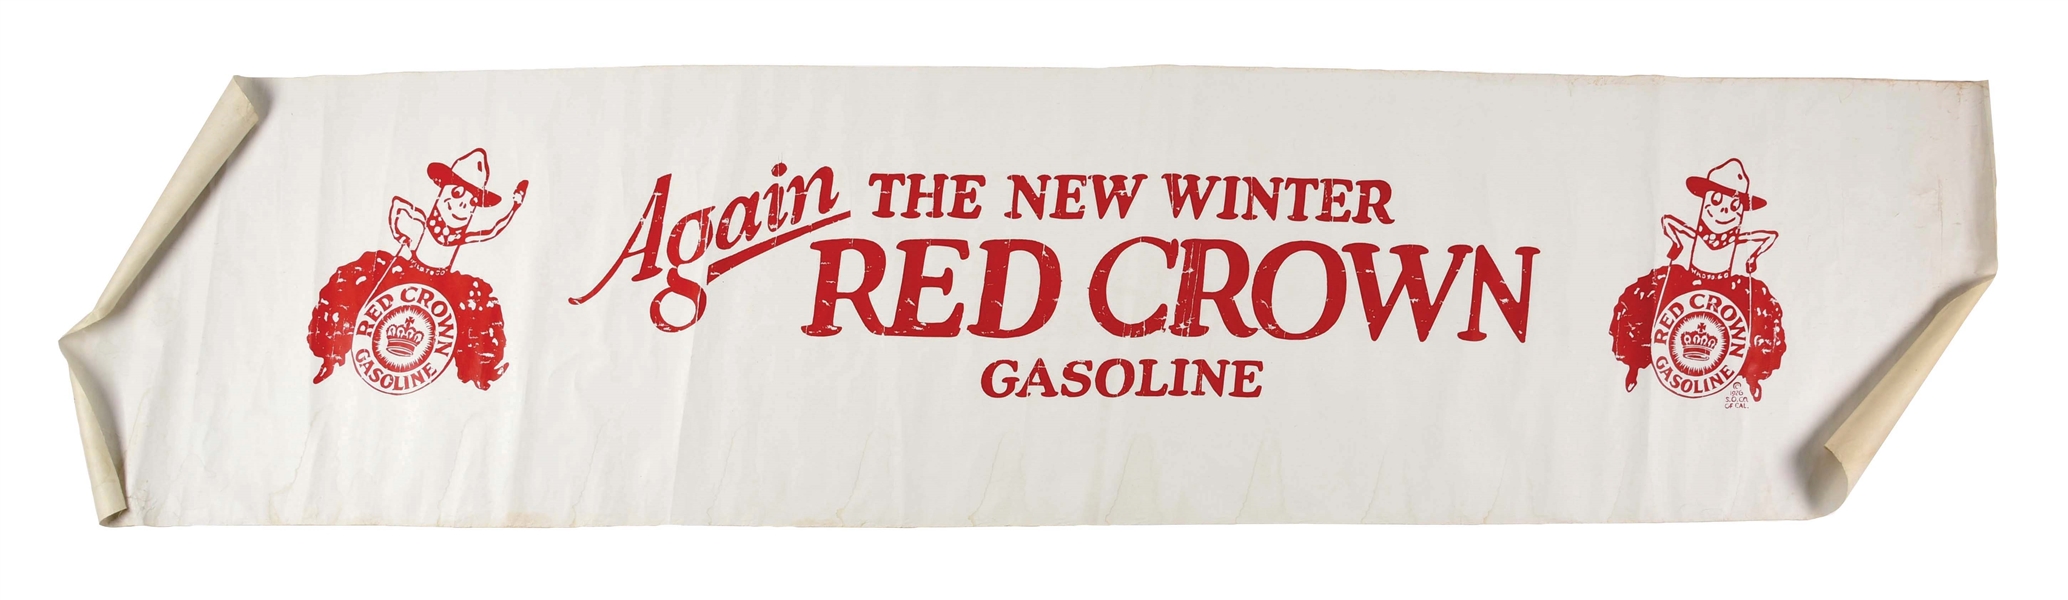 THE NEW WINTER RED CROWN GASOLINE LARGE ADVERTISING BANNER.